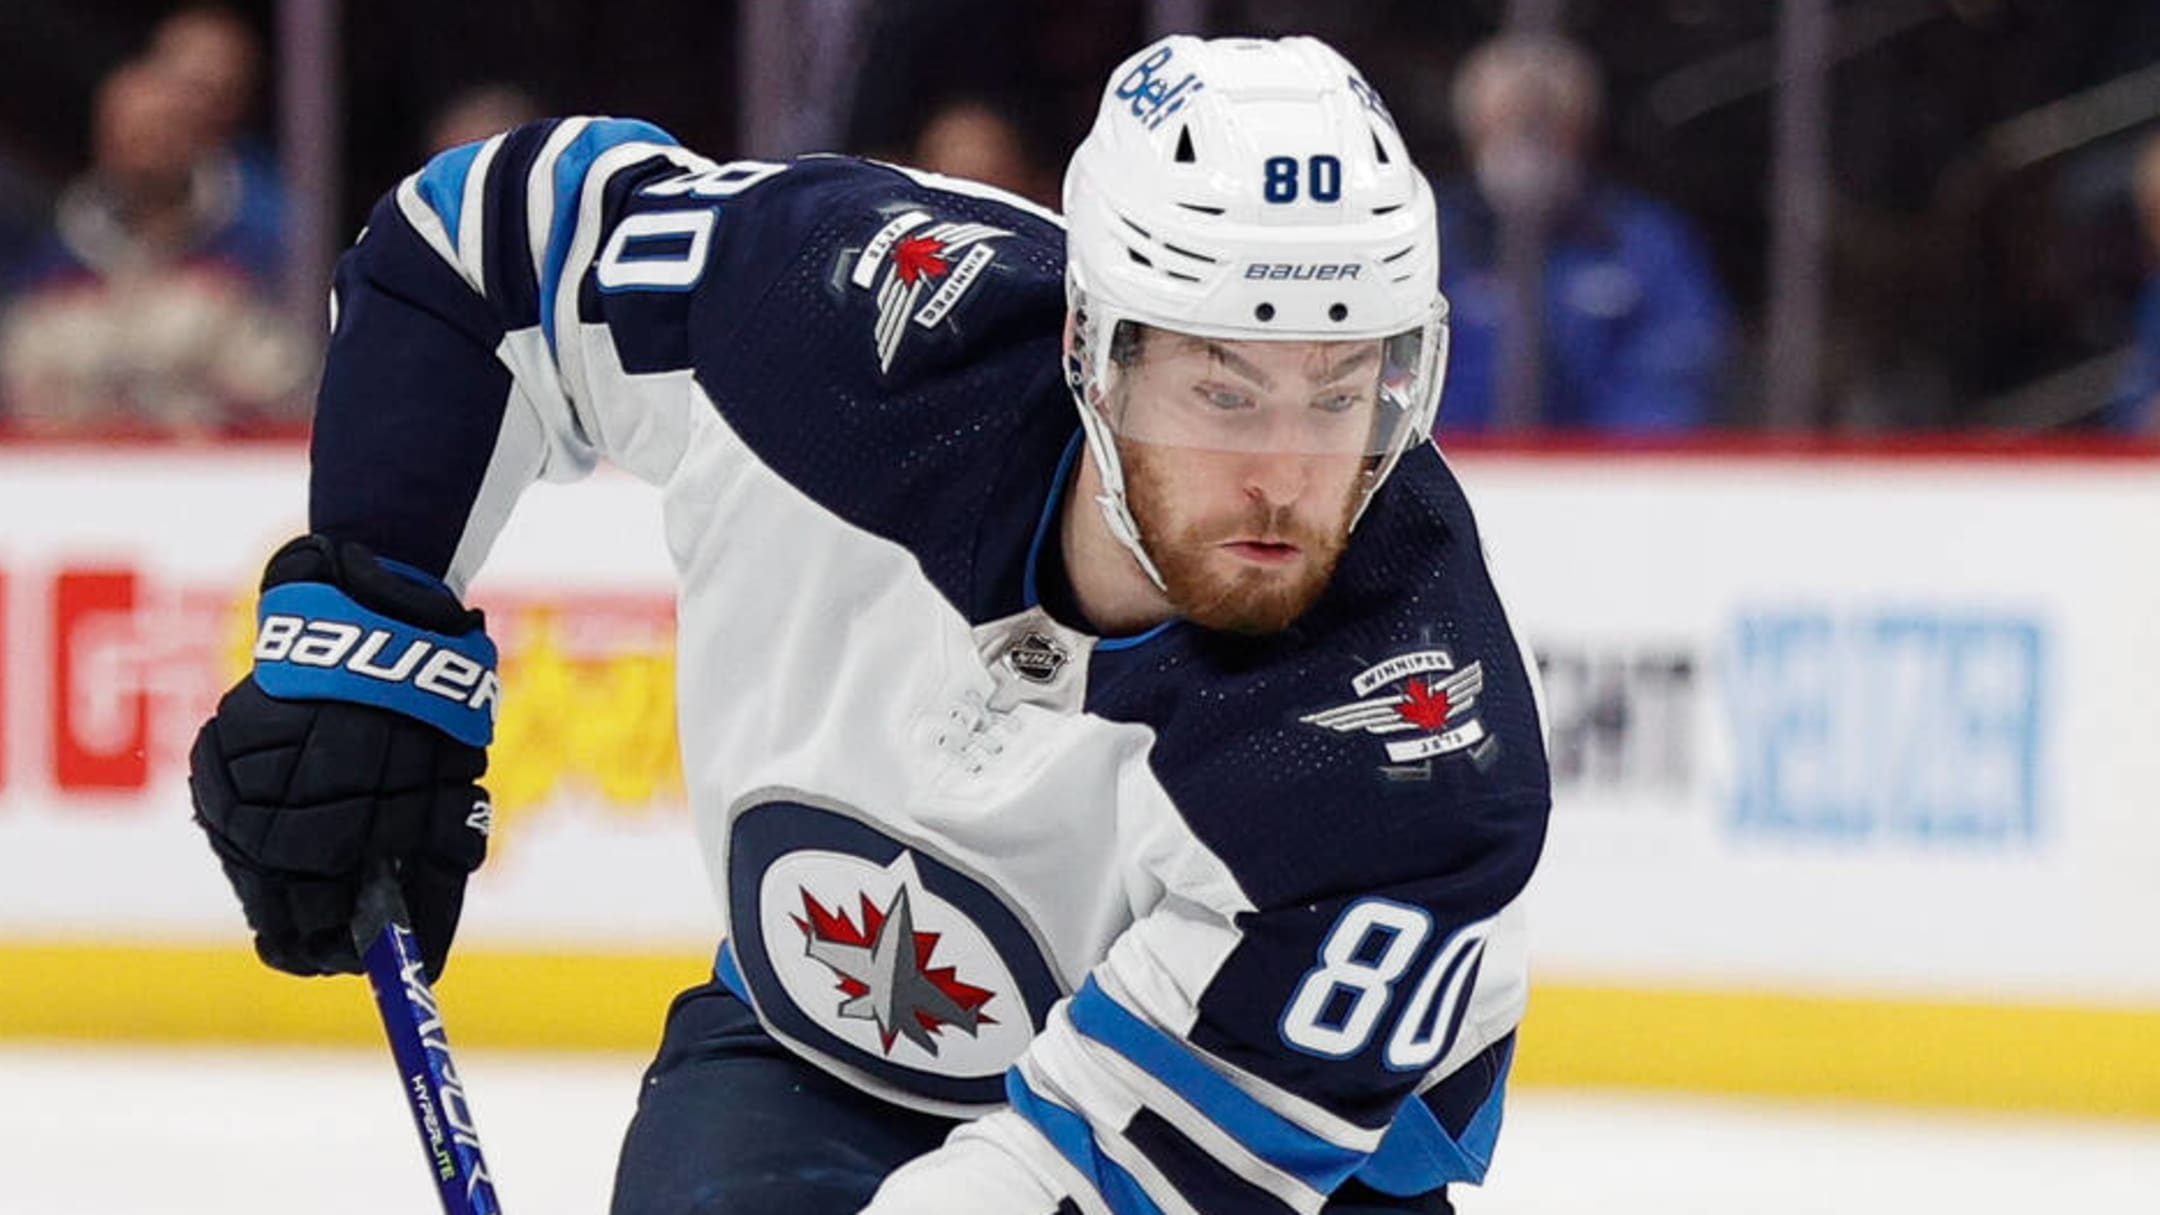 Pierre-Luc Dubois trade: Kings land center from Jets, sign him to 8-year,  $68 million contract - DraftKings Network